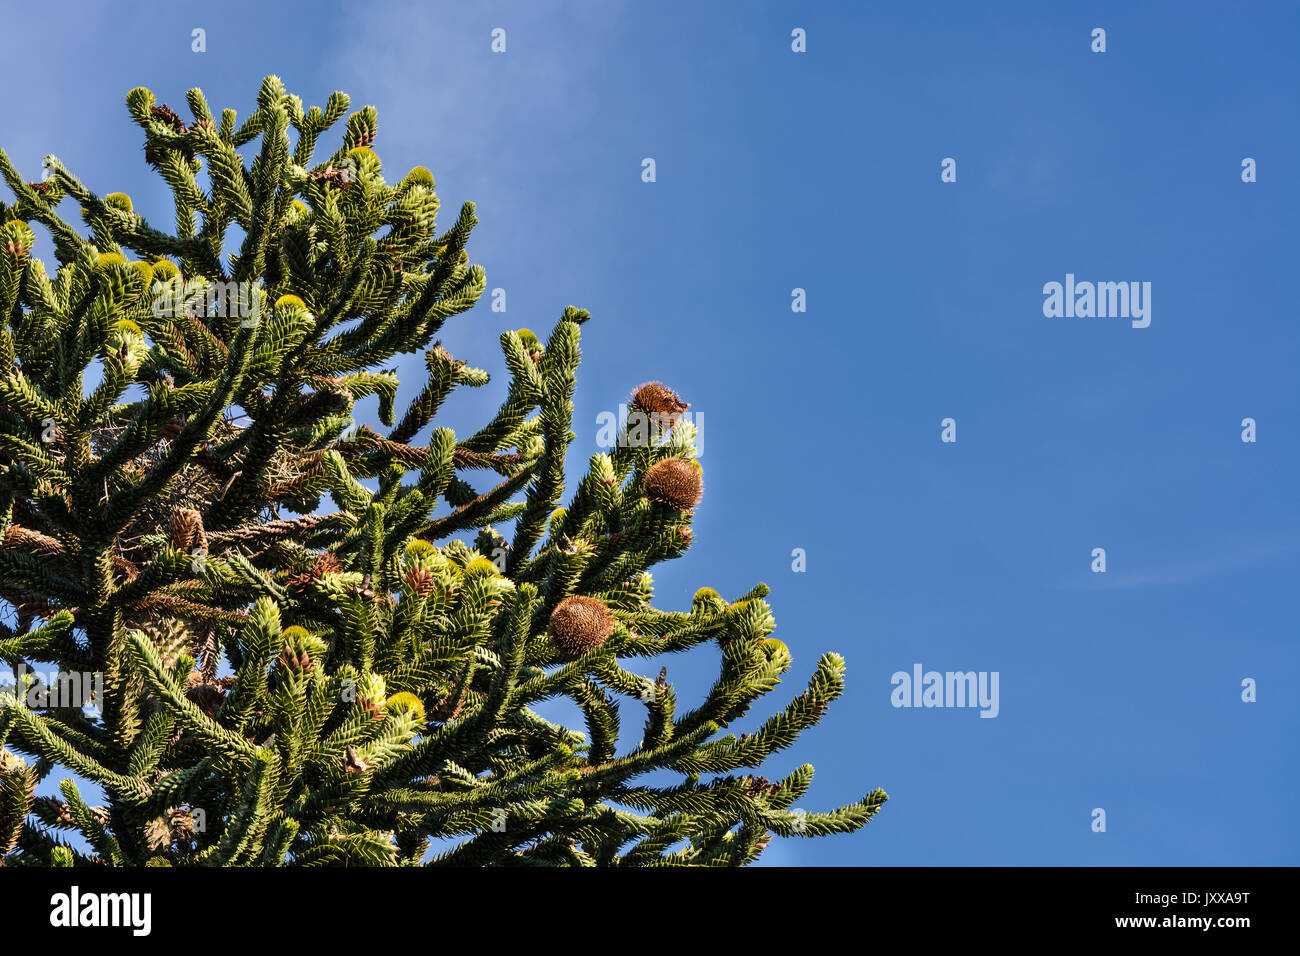 Araucaria grow evergreen trees and belong to the plant family of the conifers. Stock Photo